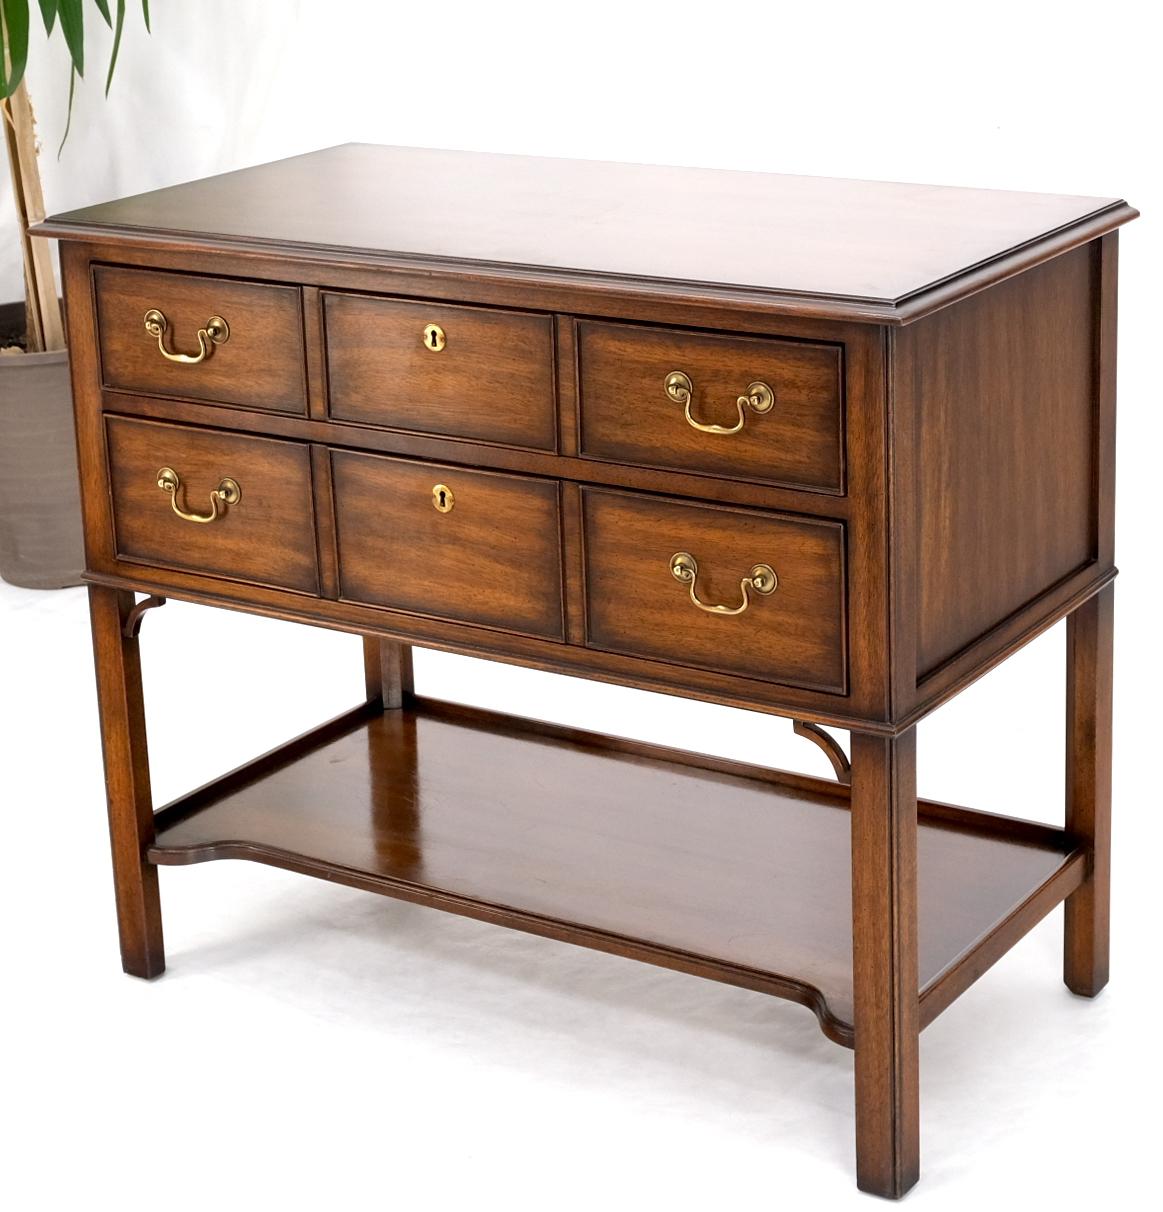 Mahogany Brass Hardware Kindel Entry Hall Chest Console Table Buffet Cabinet 11